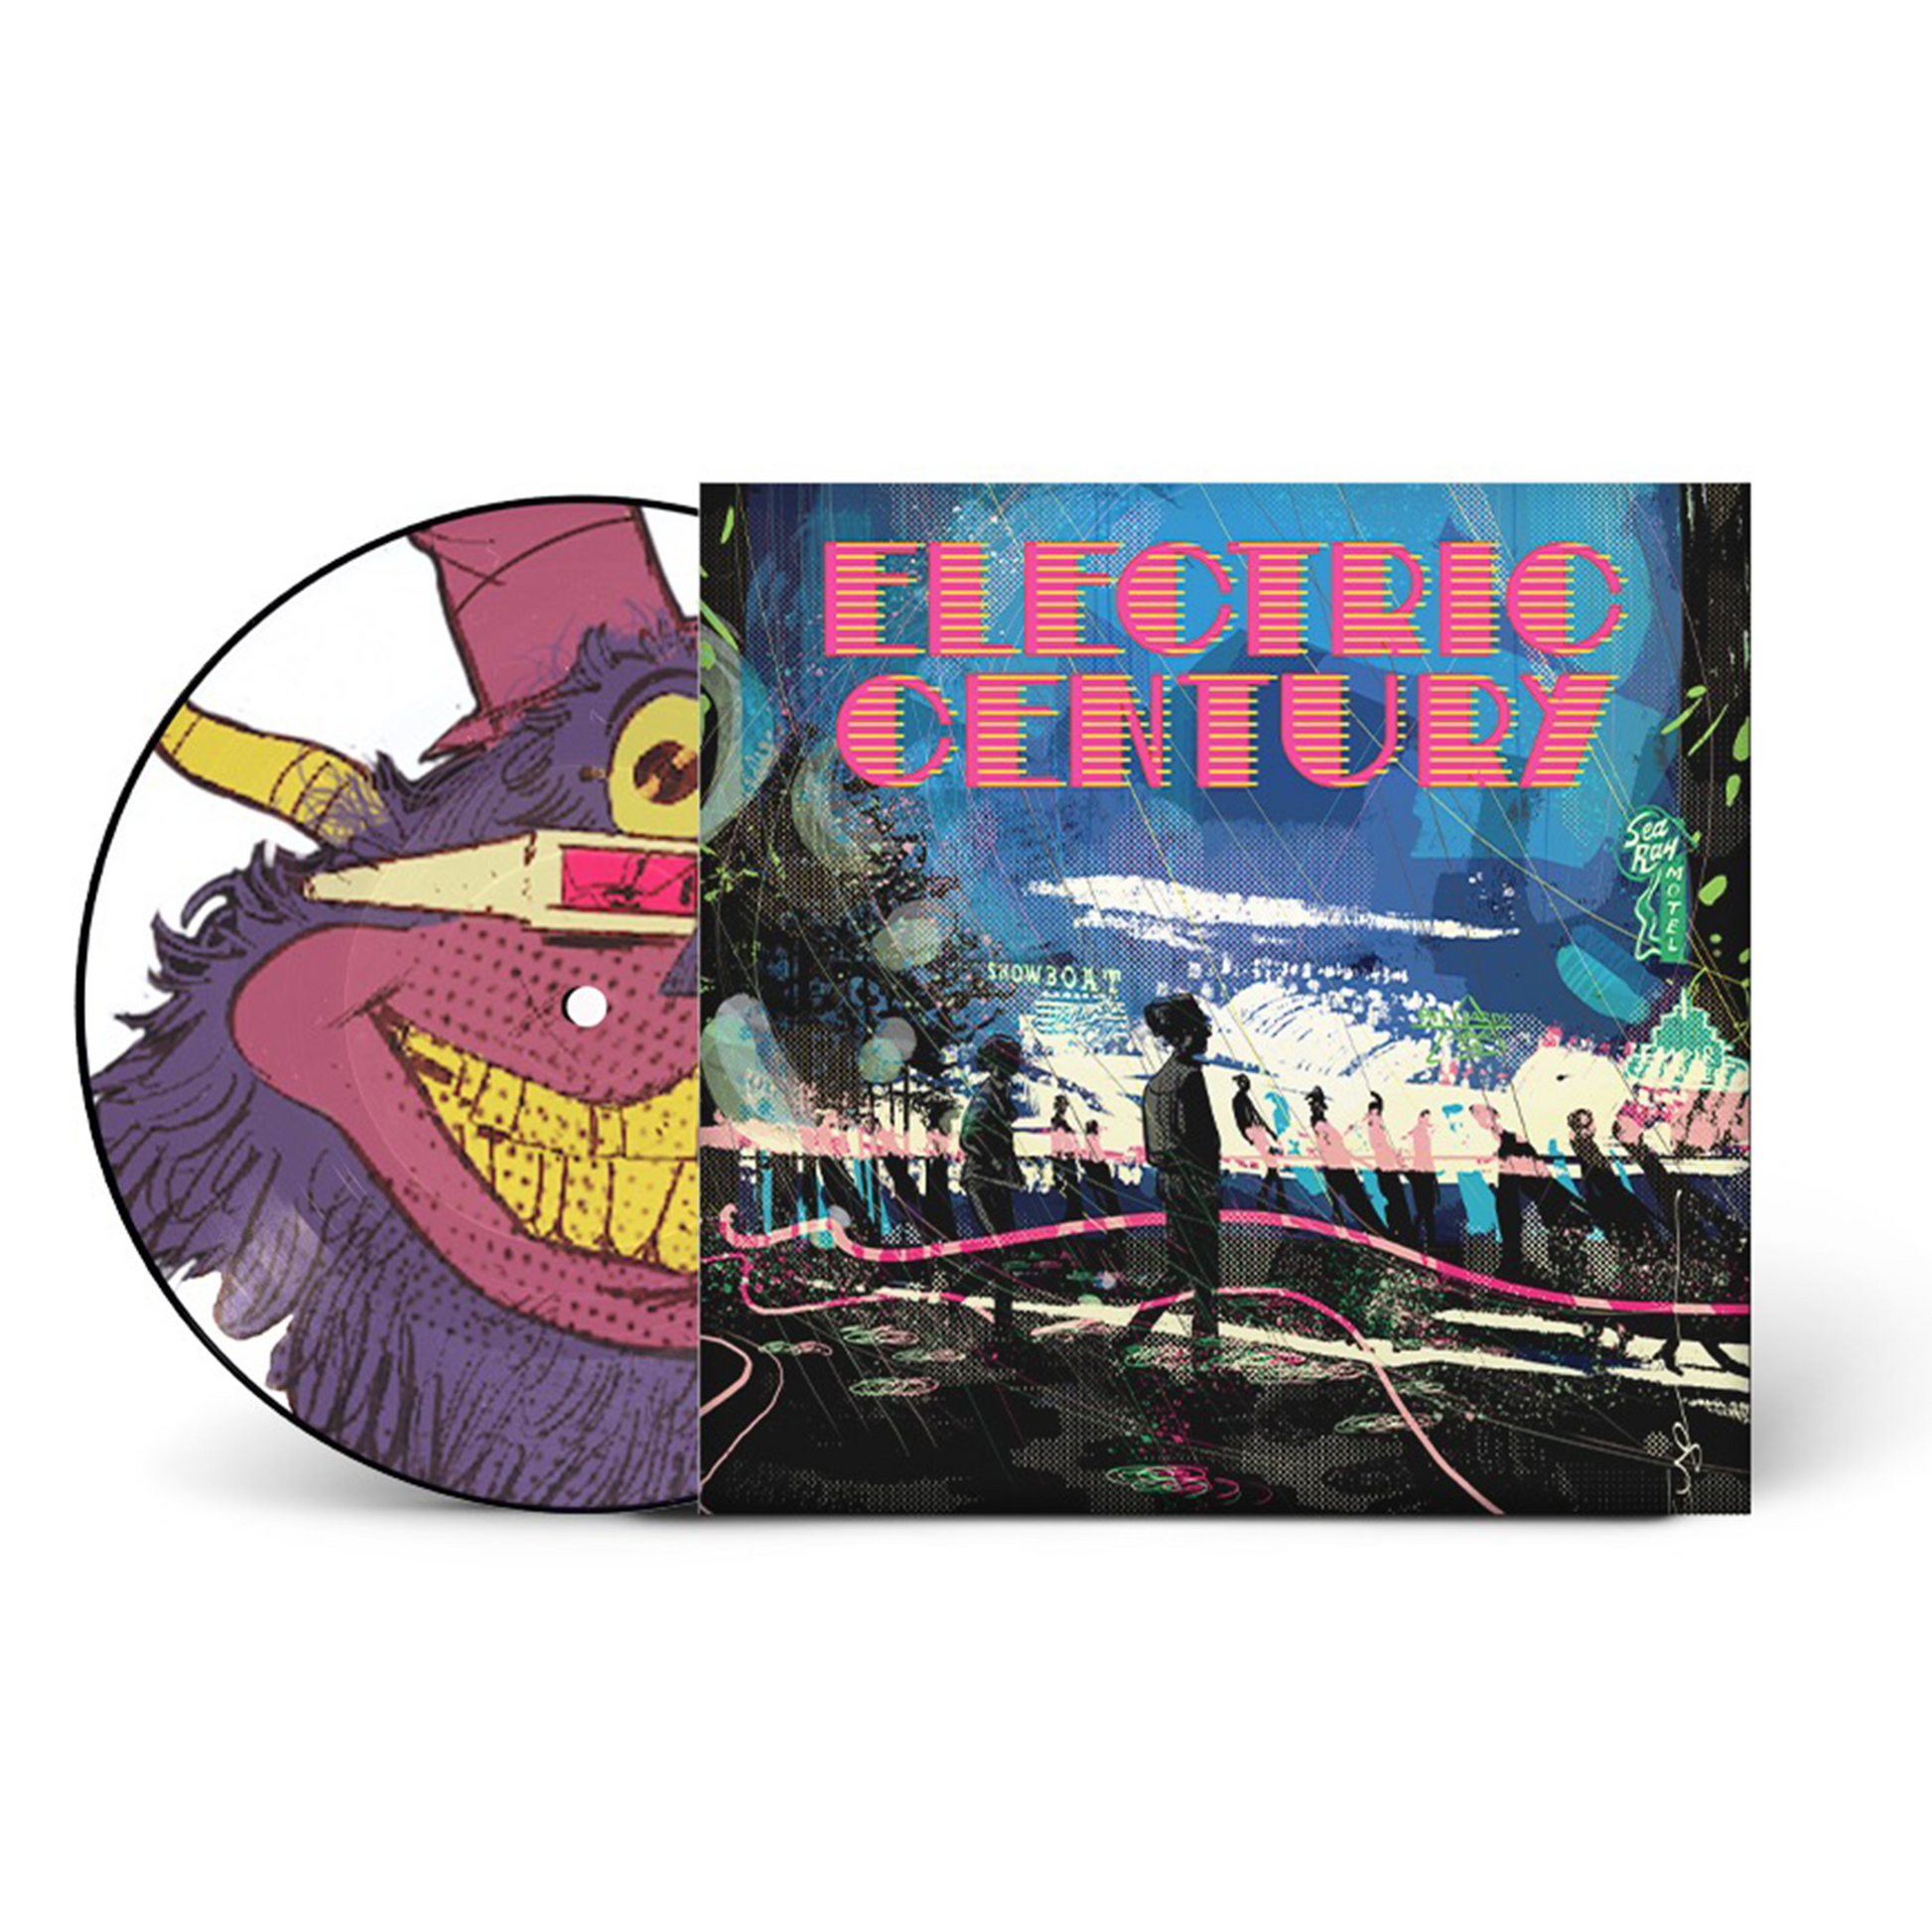 Electric Century - The Graphic Novel (Deluxe Edition) (4937817849996)